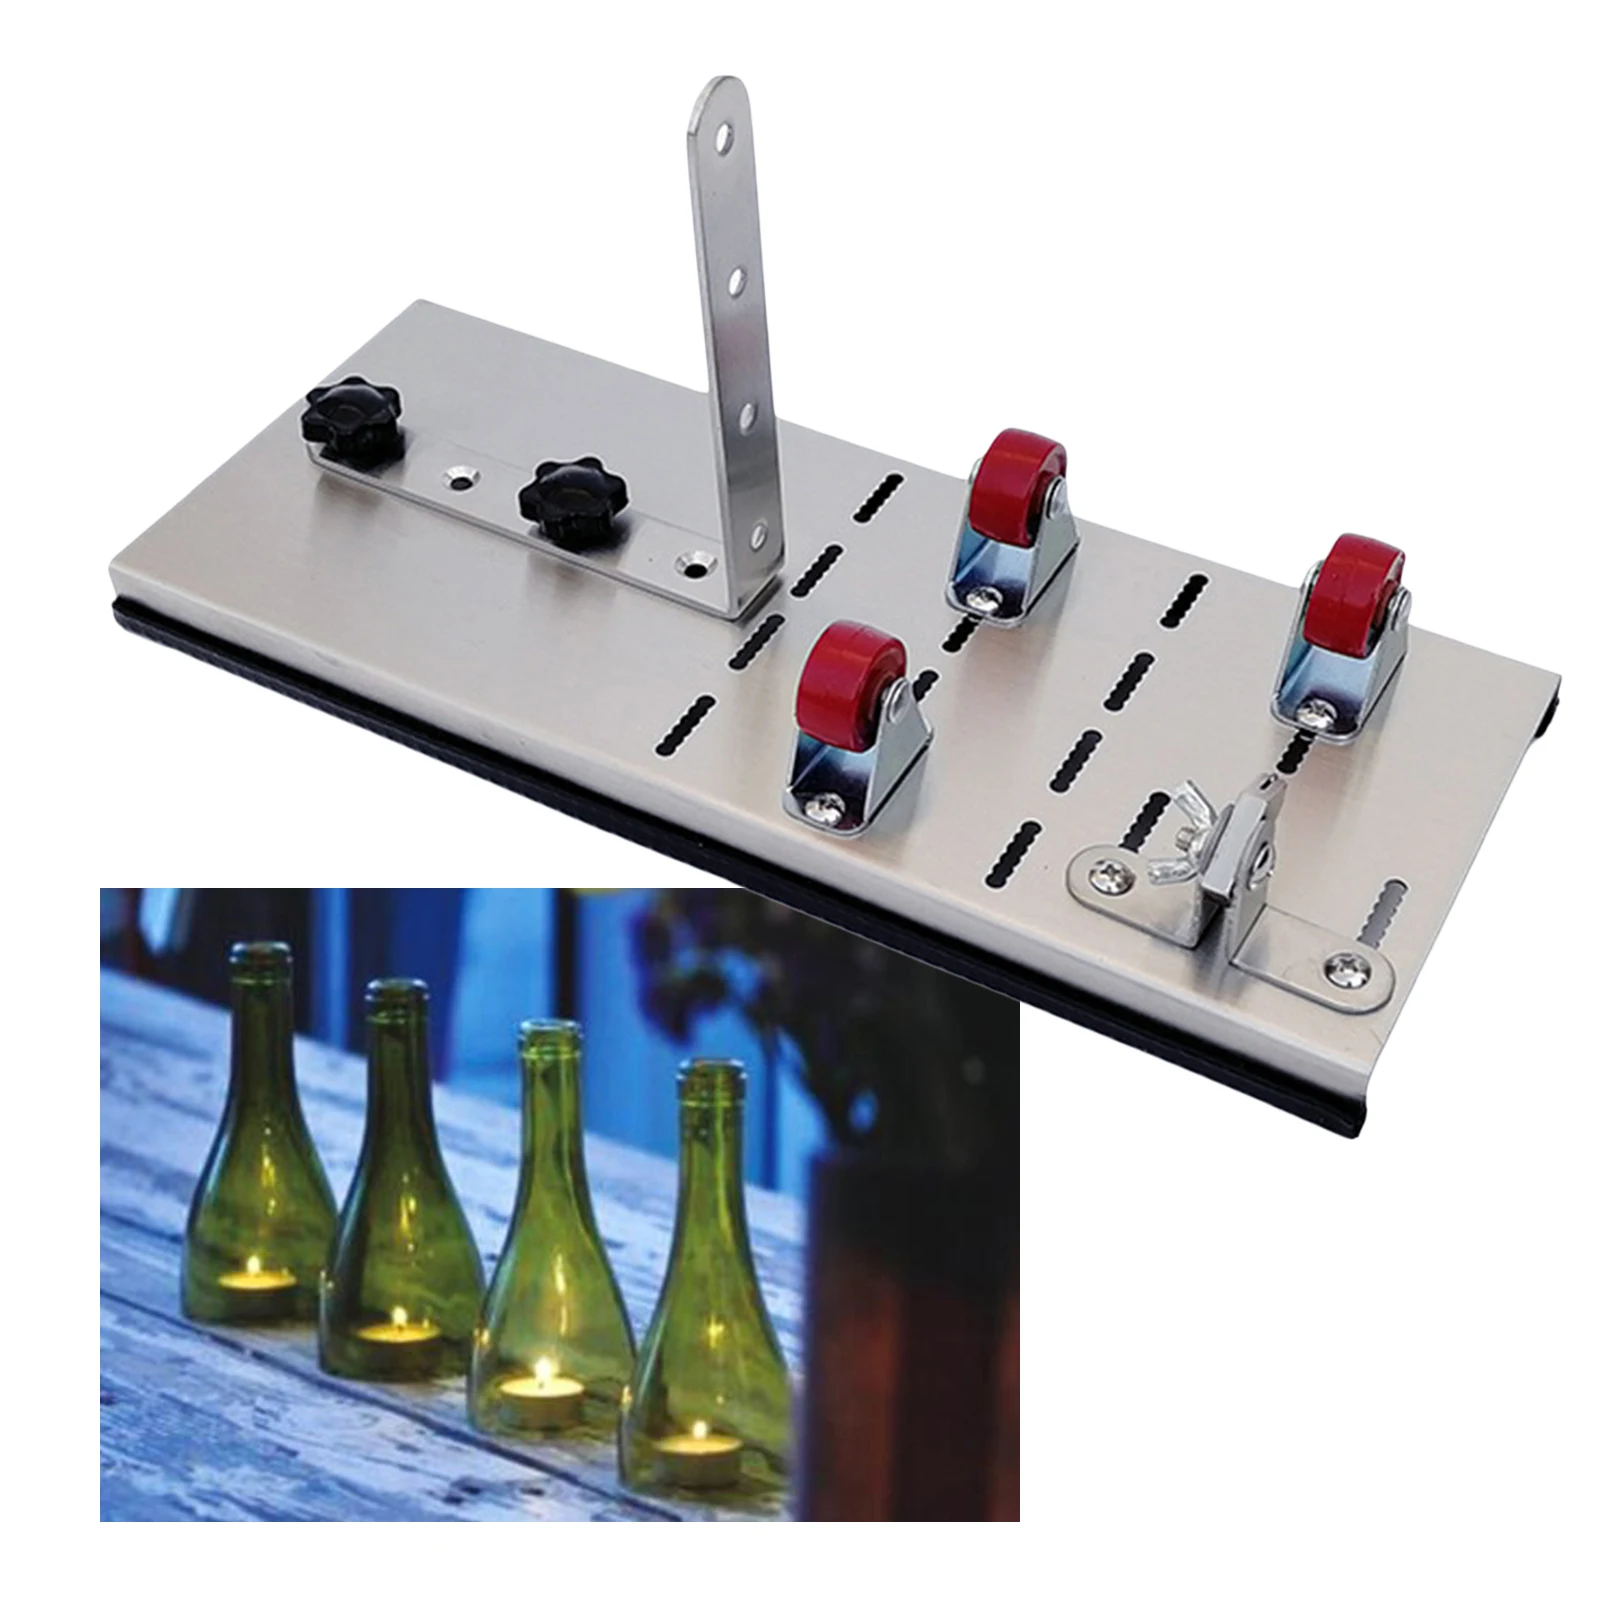 Professional Glass Bottle Cutter Wine Recycling Machine Liquor DIY Projects